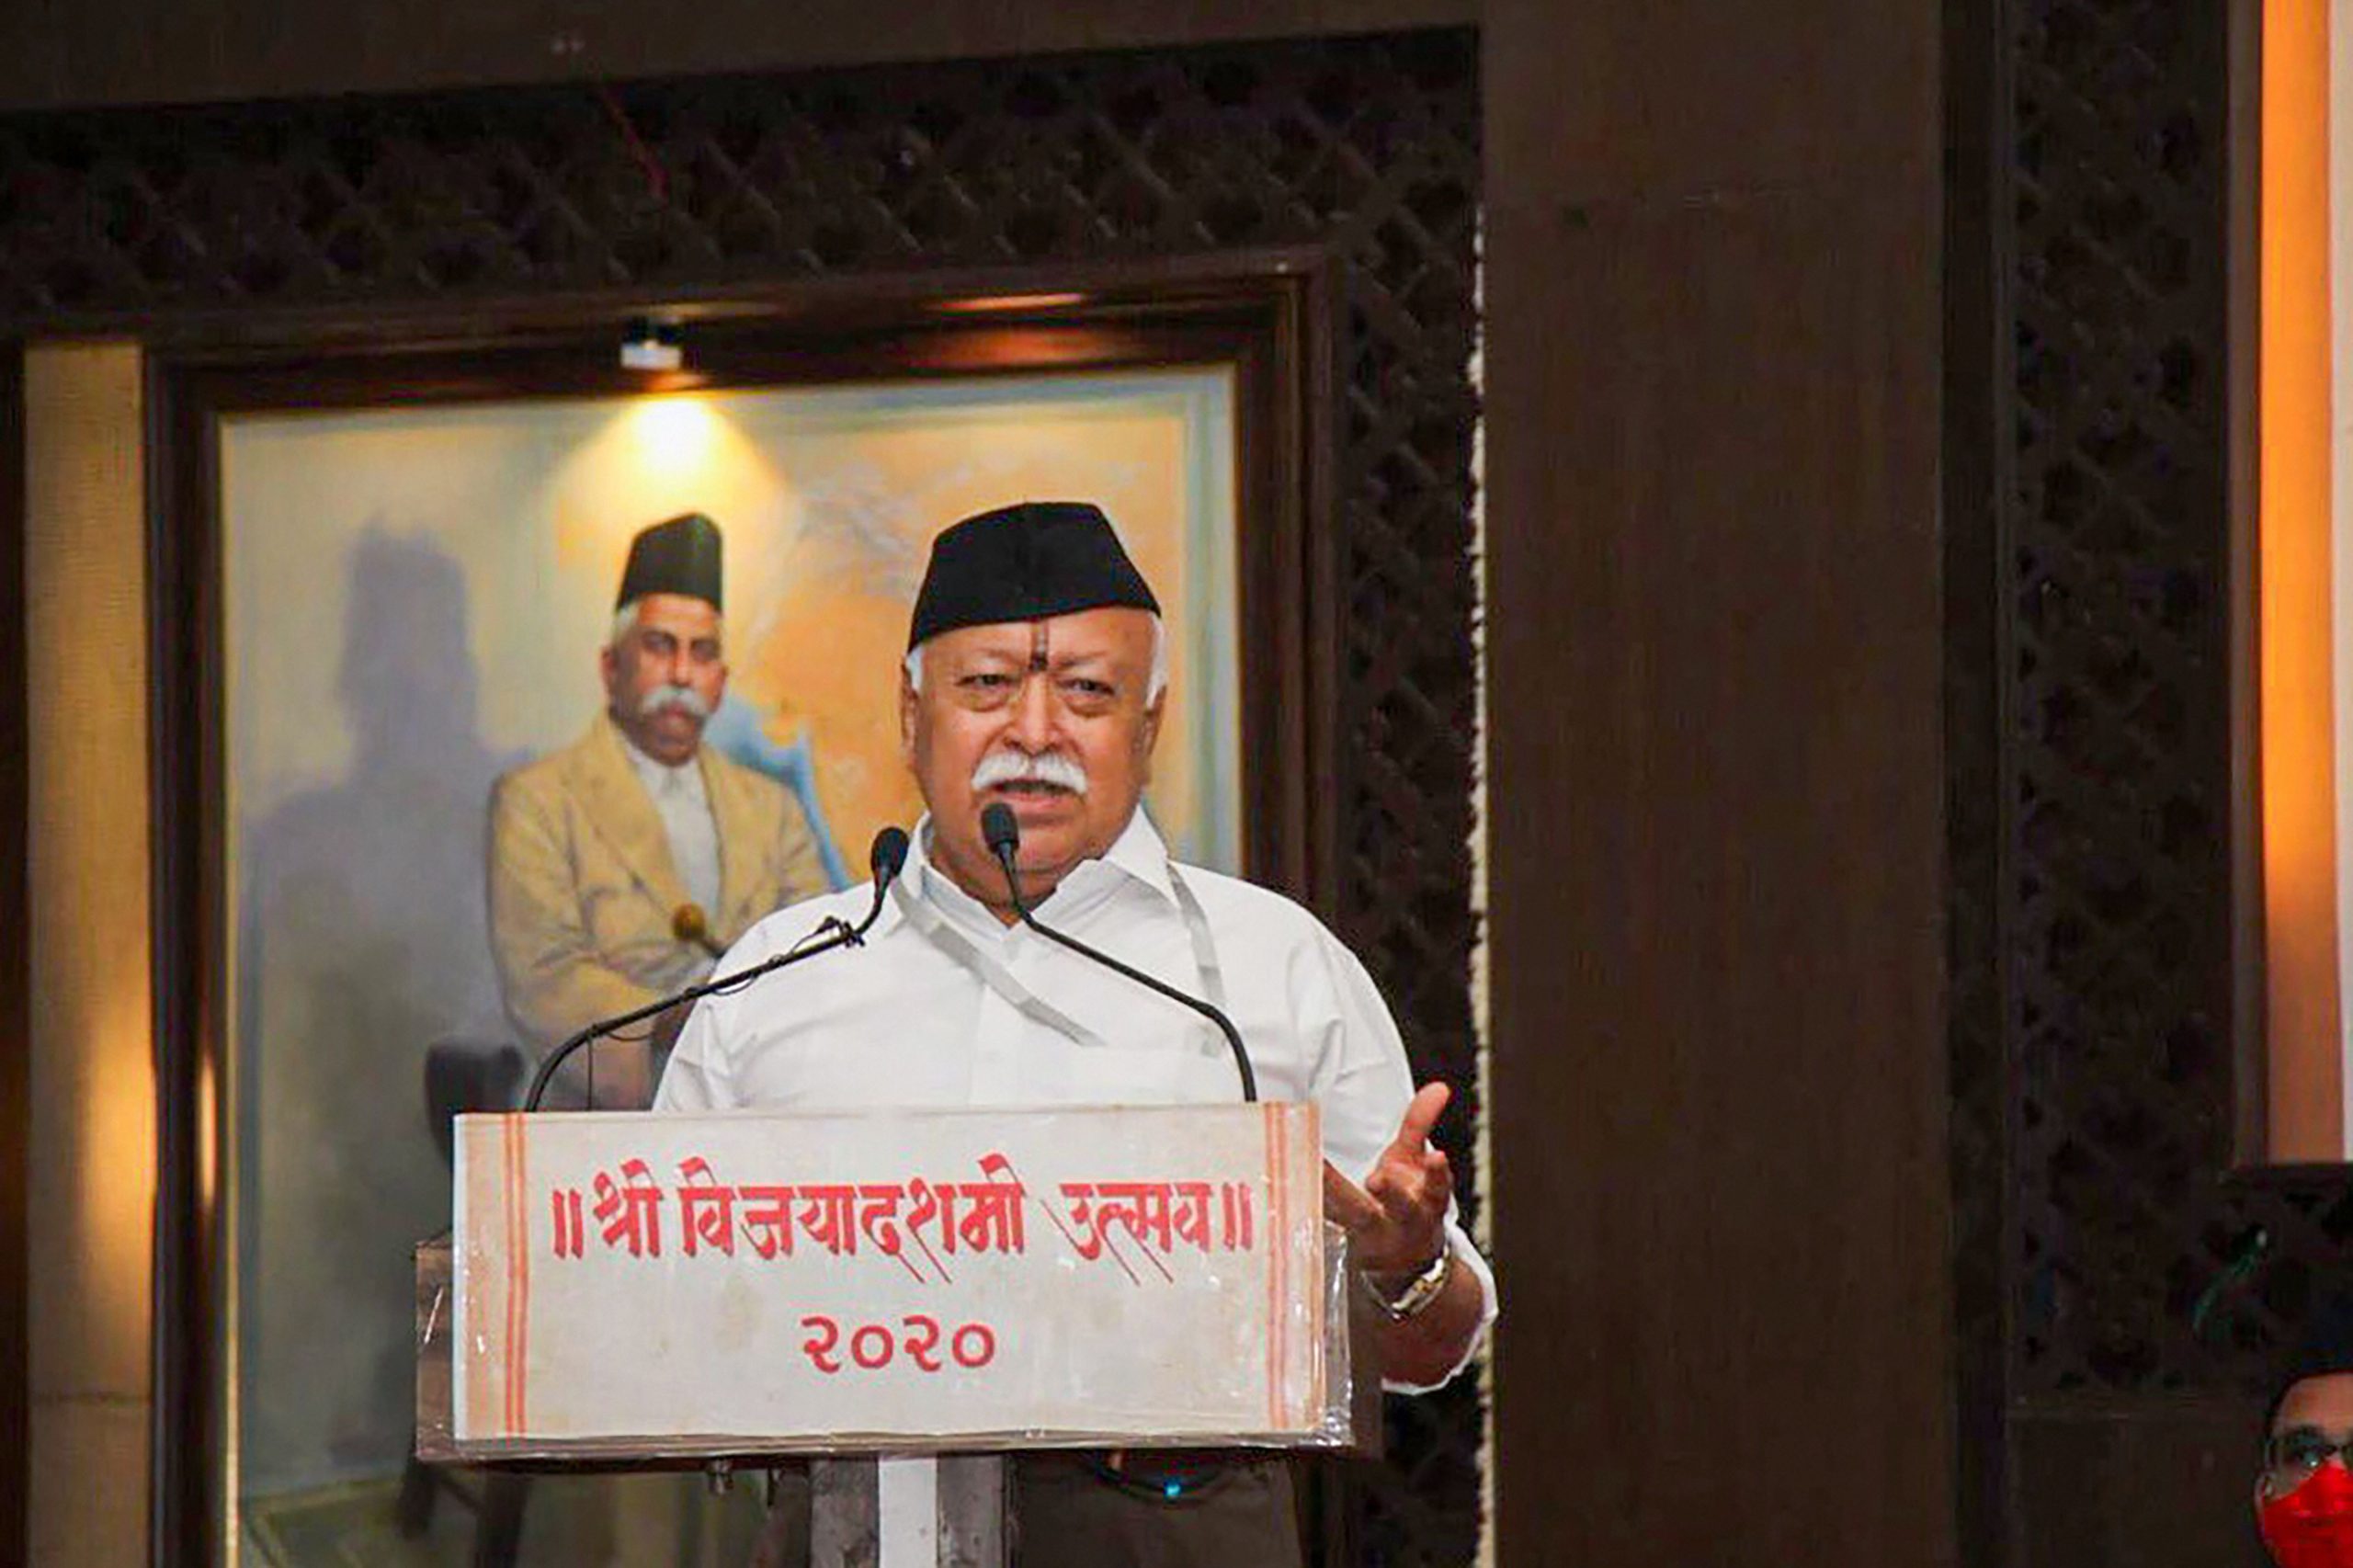 India should be bigger than China in power and scope: RSS chief Mohan Bhagwat